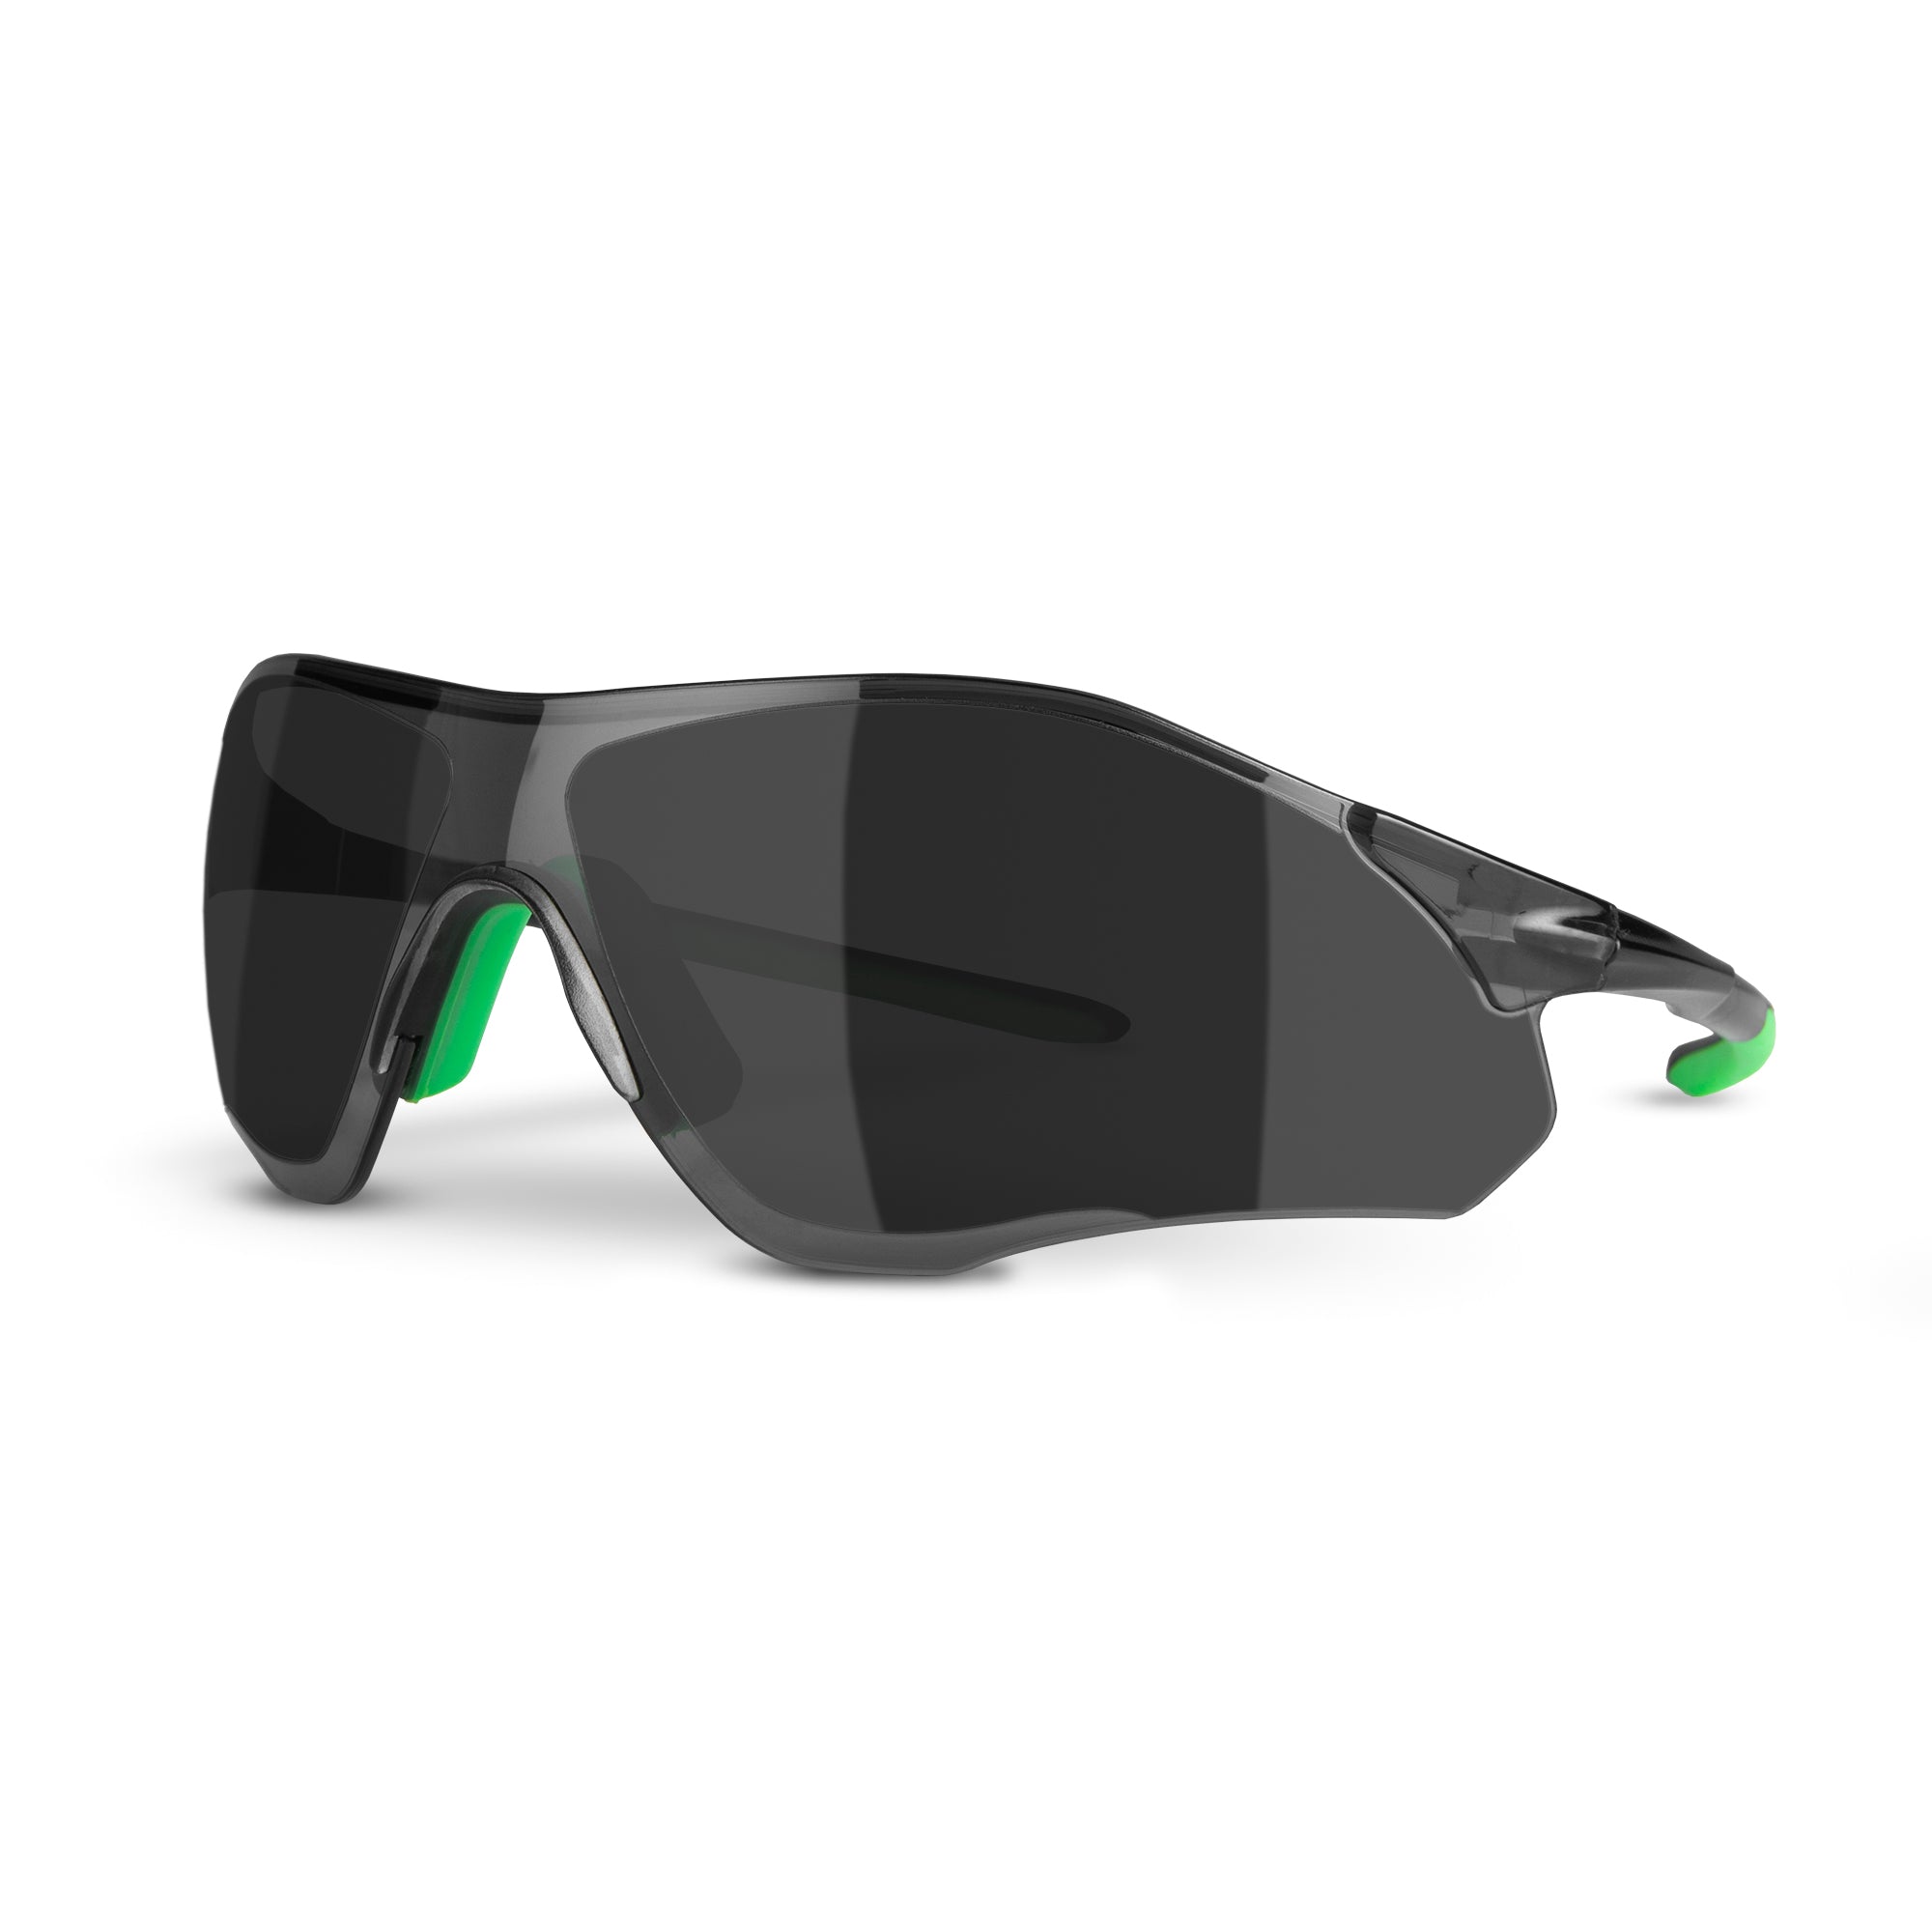 Can Oakley glasses be used as safety glasses? - Safety Protection Glasses